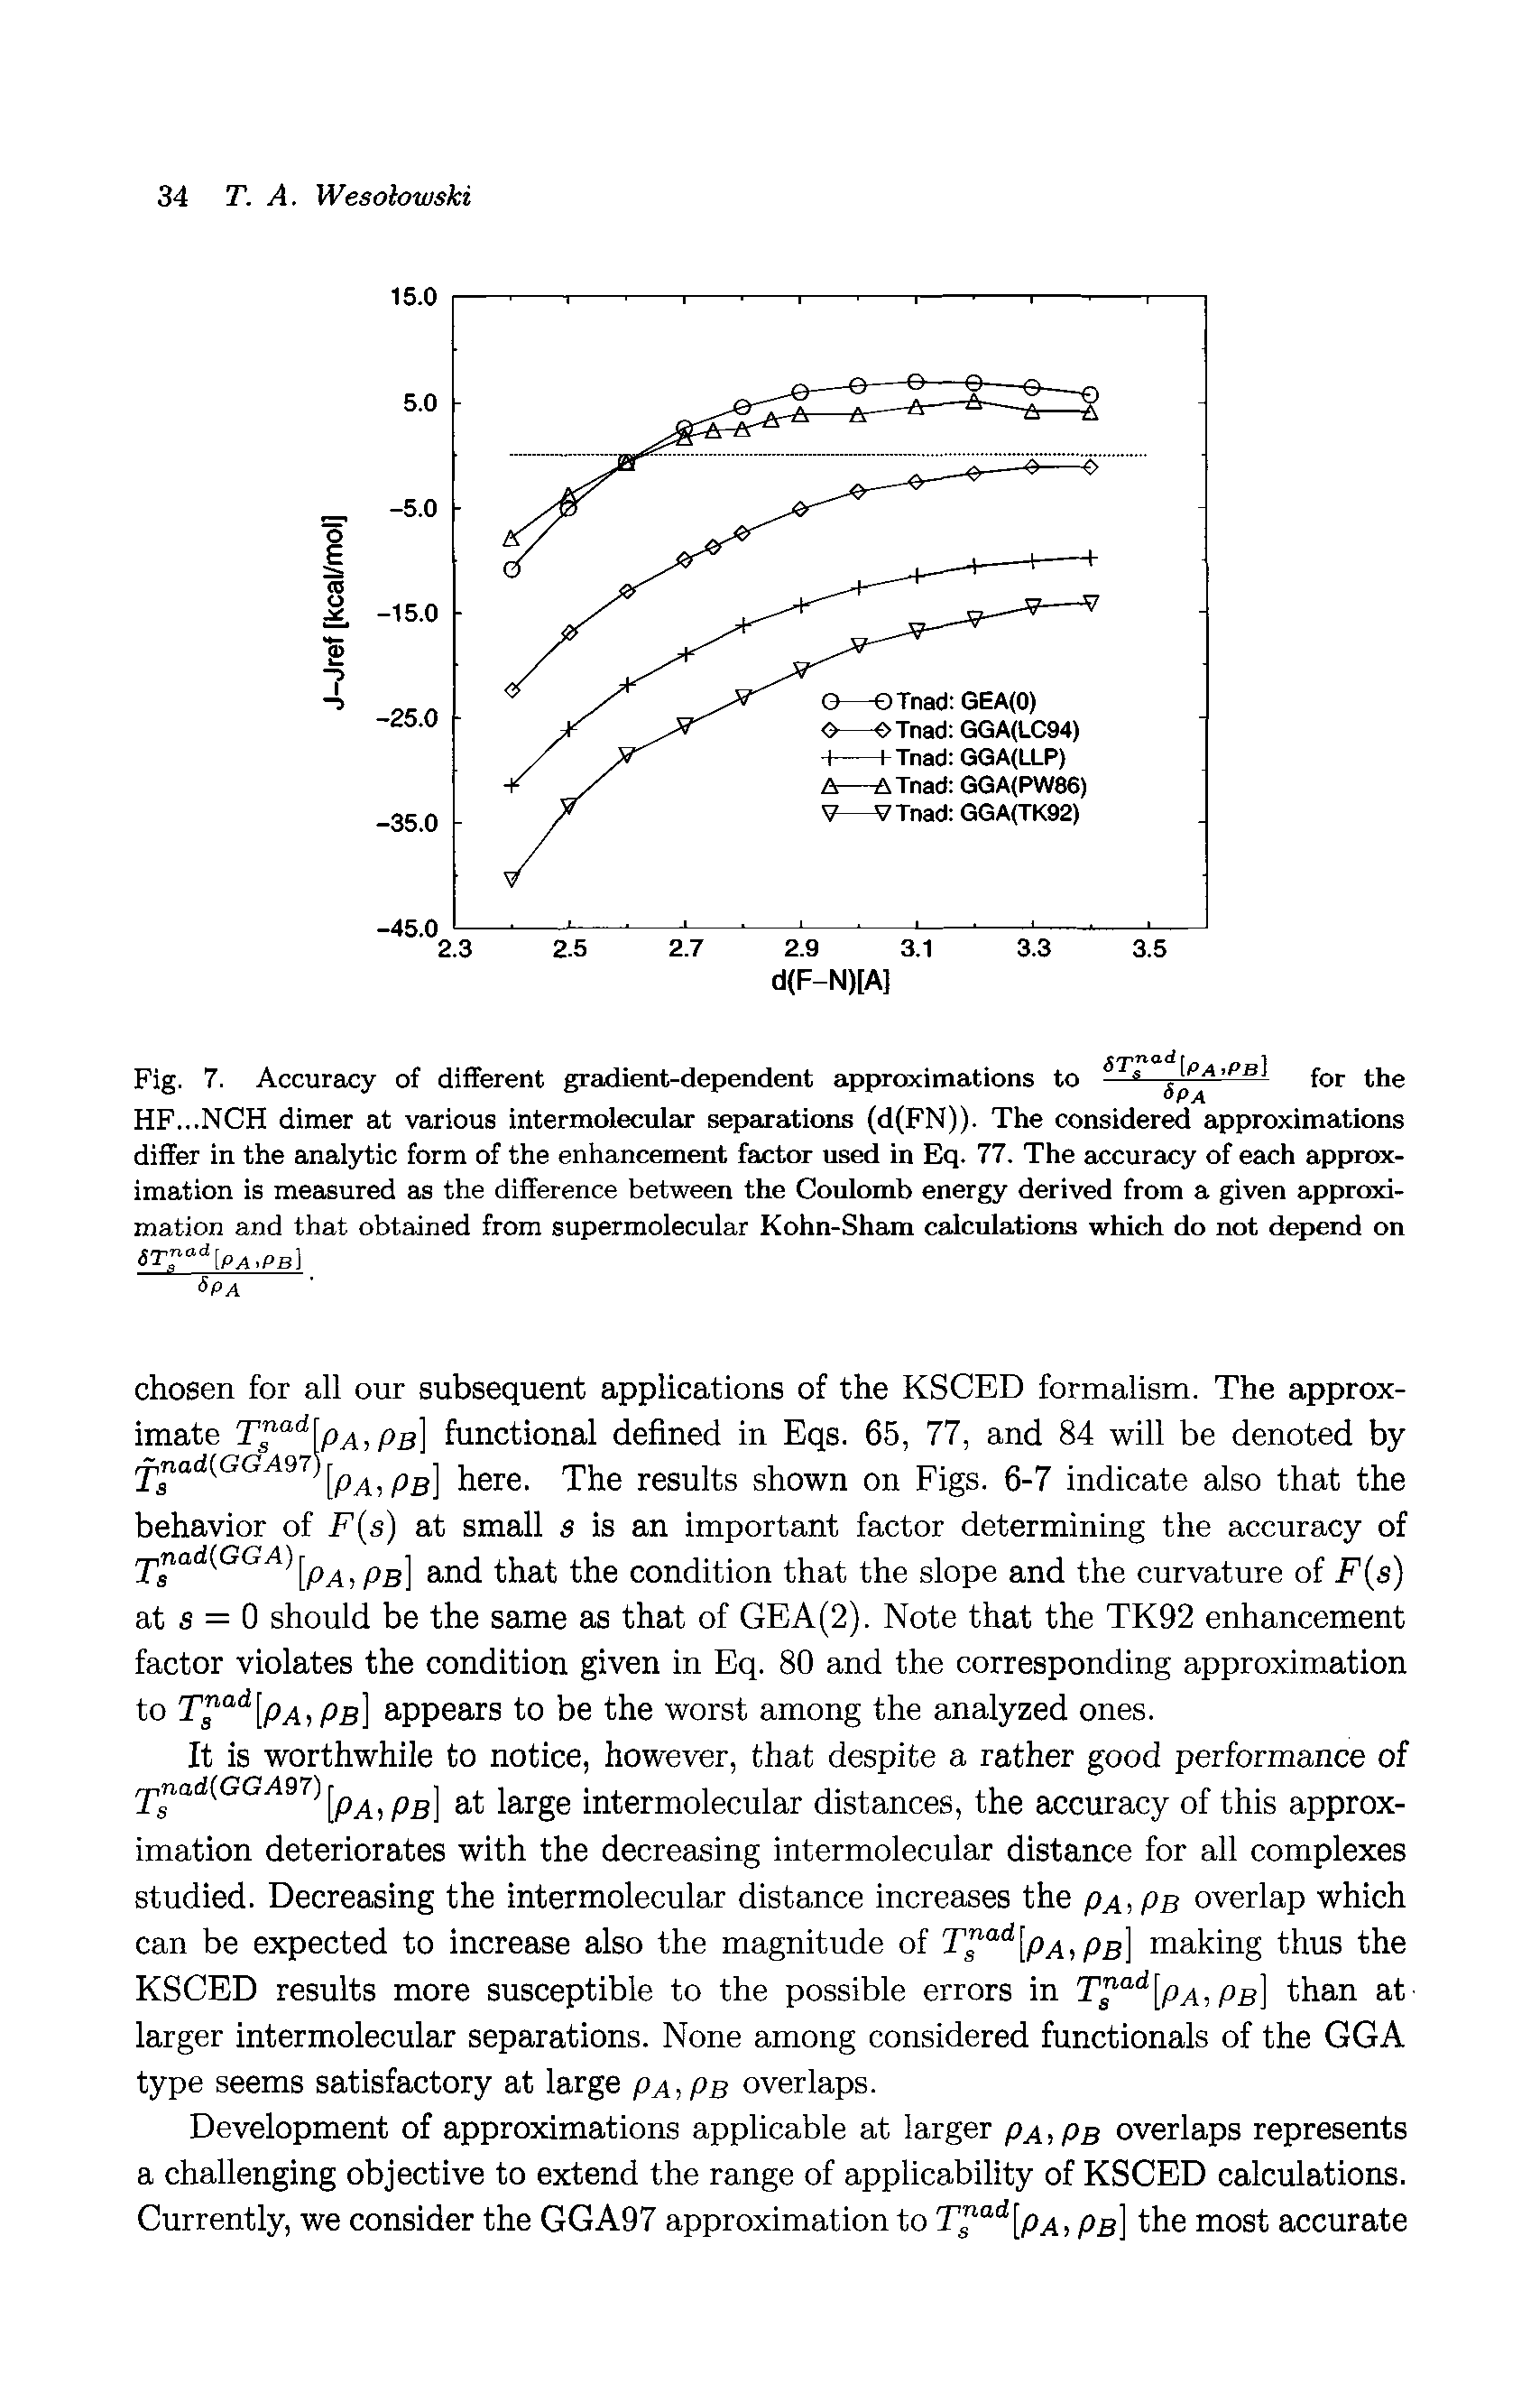 Fig. 7. Accuracy of different gradient-dependent approximations to —2— f°r HF...NCH dimer at various intermolecular separations (d(FN)). The considered approximations differ in the analytic form of the enhancement factor used in Eq. 77. The accuracy of each approximation is measured as the difference between the Coulomb energy derived from a given approximation and that obtained from supermolecular Kohn-Sham calculations which do not depend on 6T d pA,PB ...